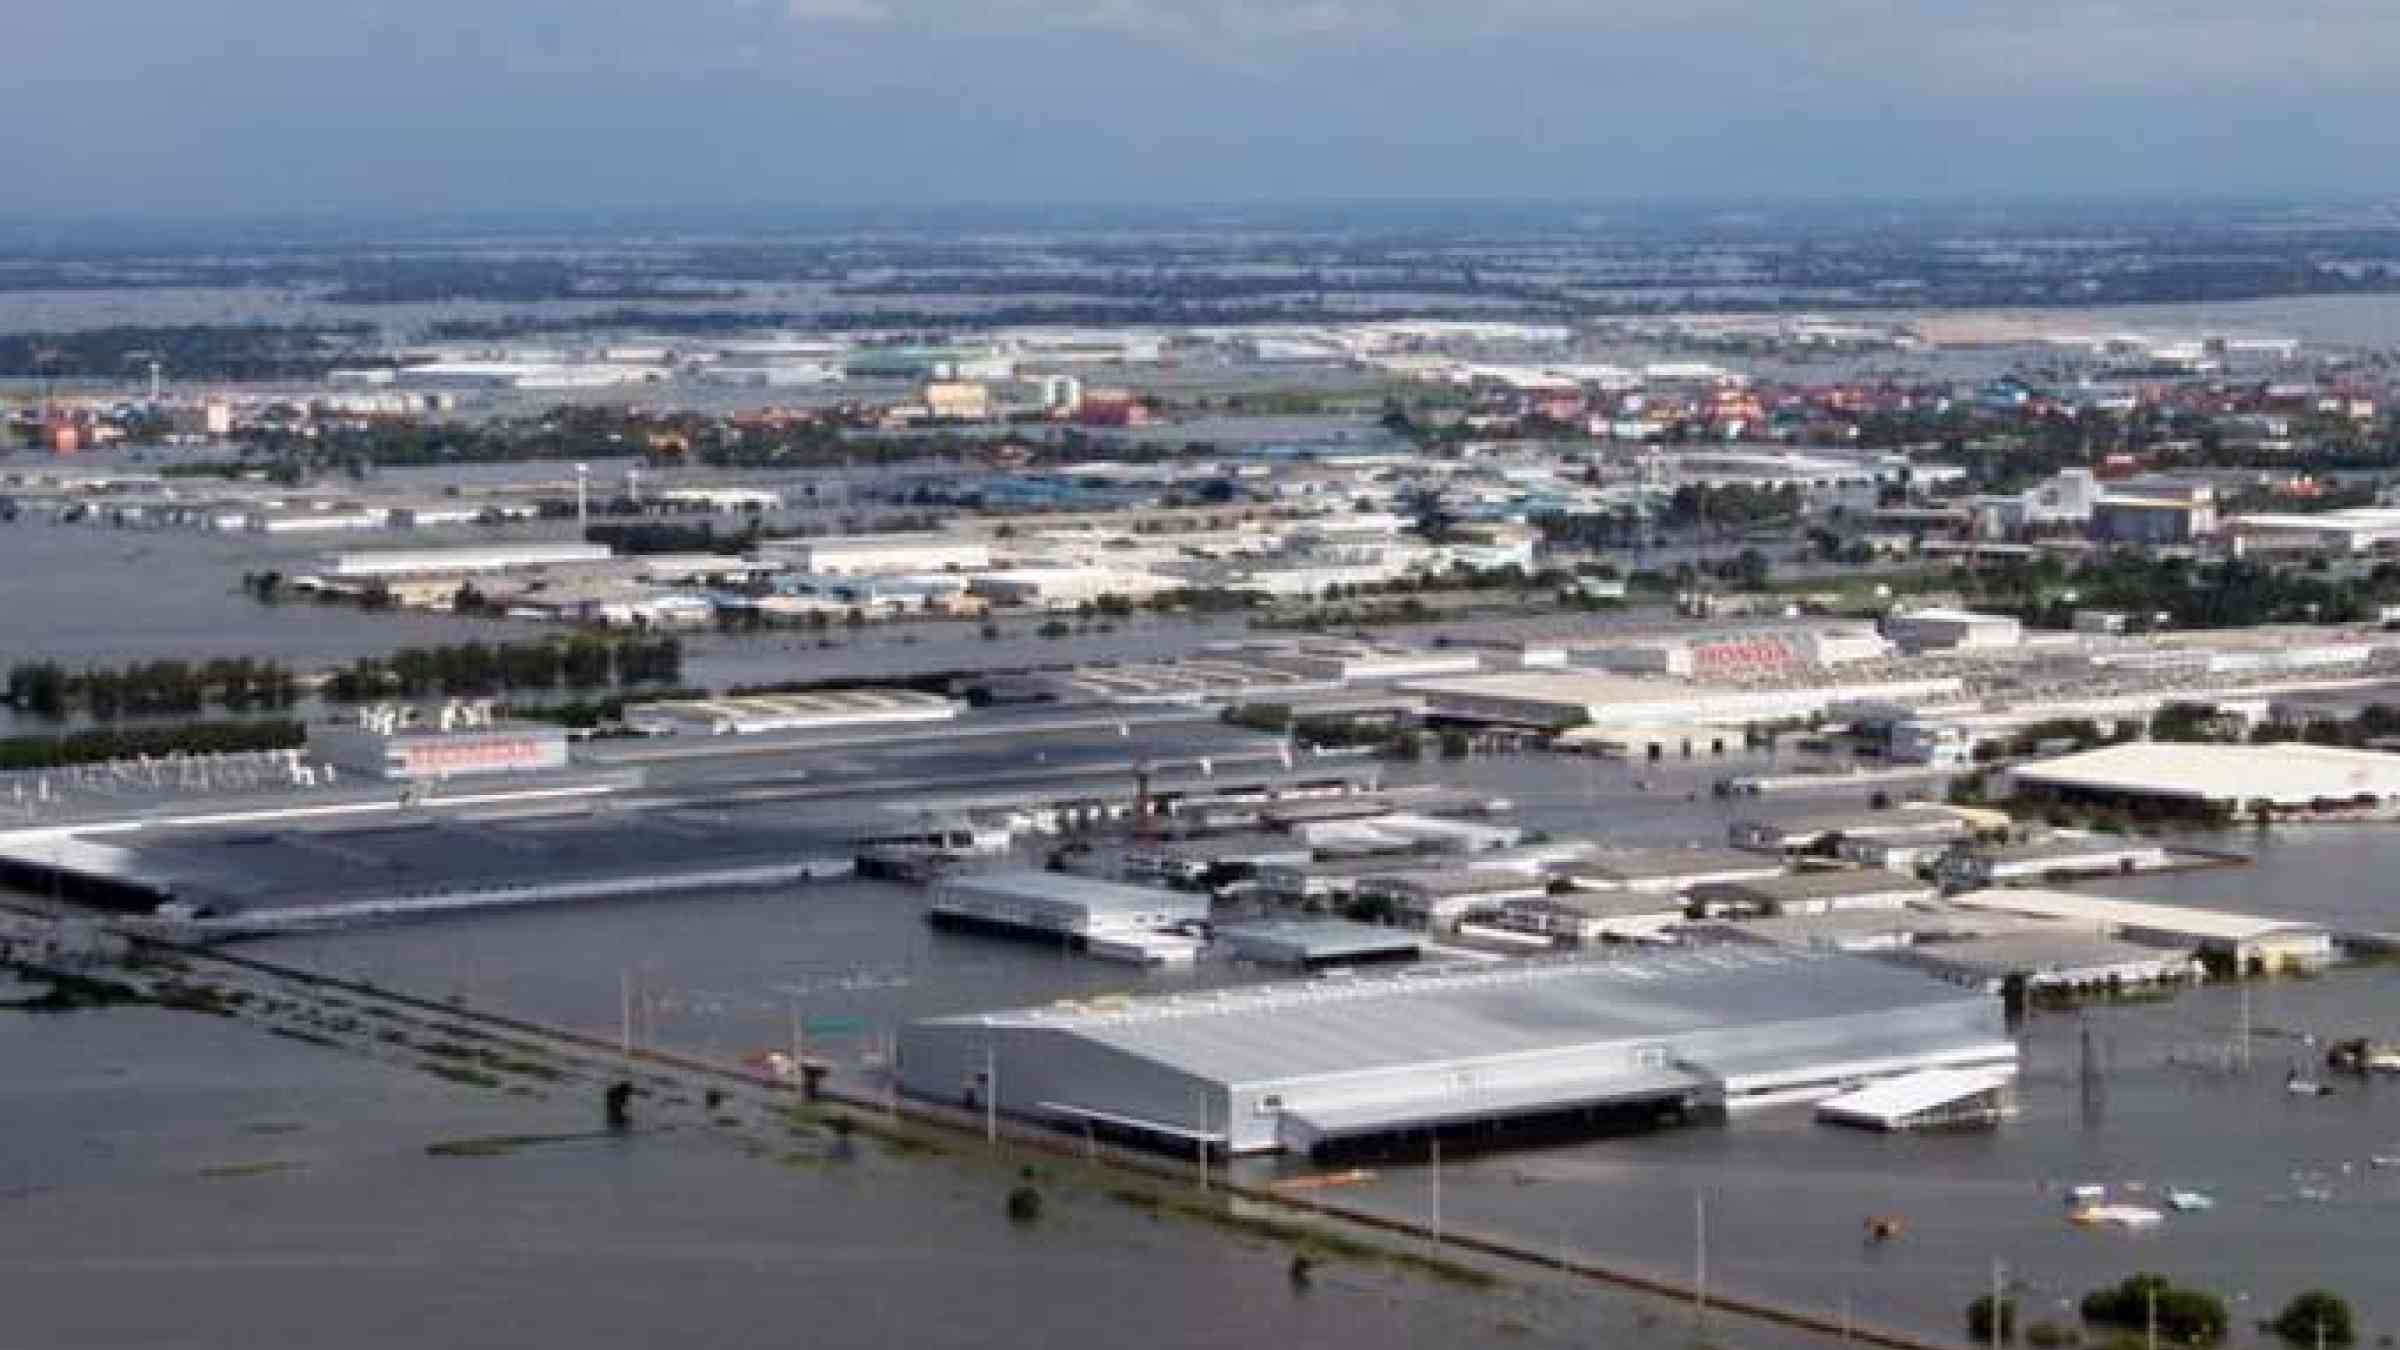 Floodwaters inundated Rojana Industrial Park in Ayutthaya Province, Thailand during the 2011 floods. / U.S. Marine Corps